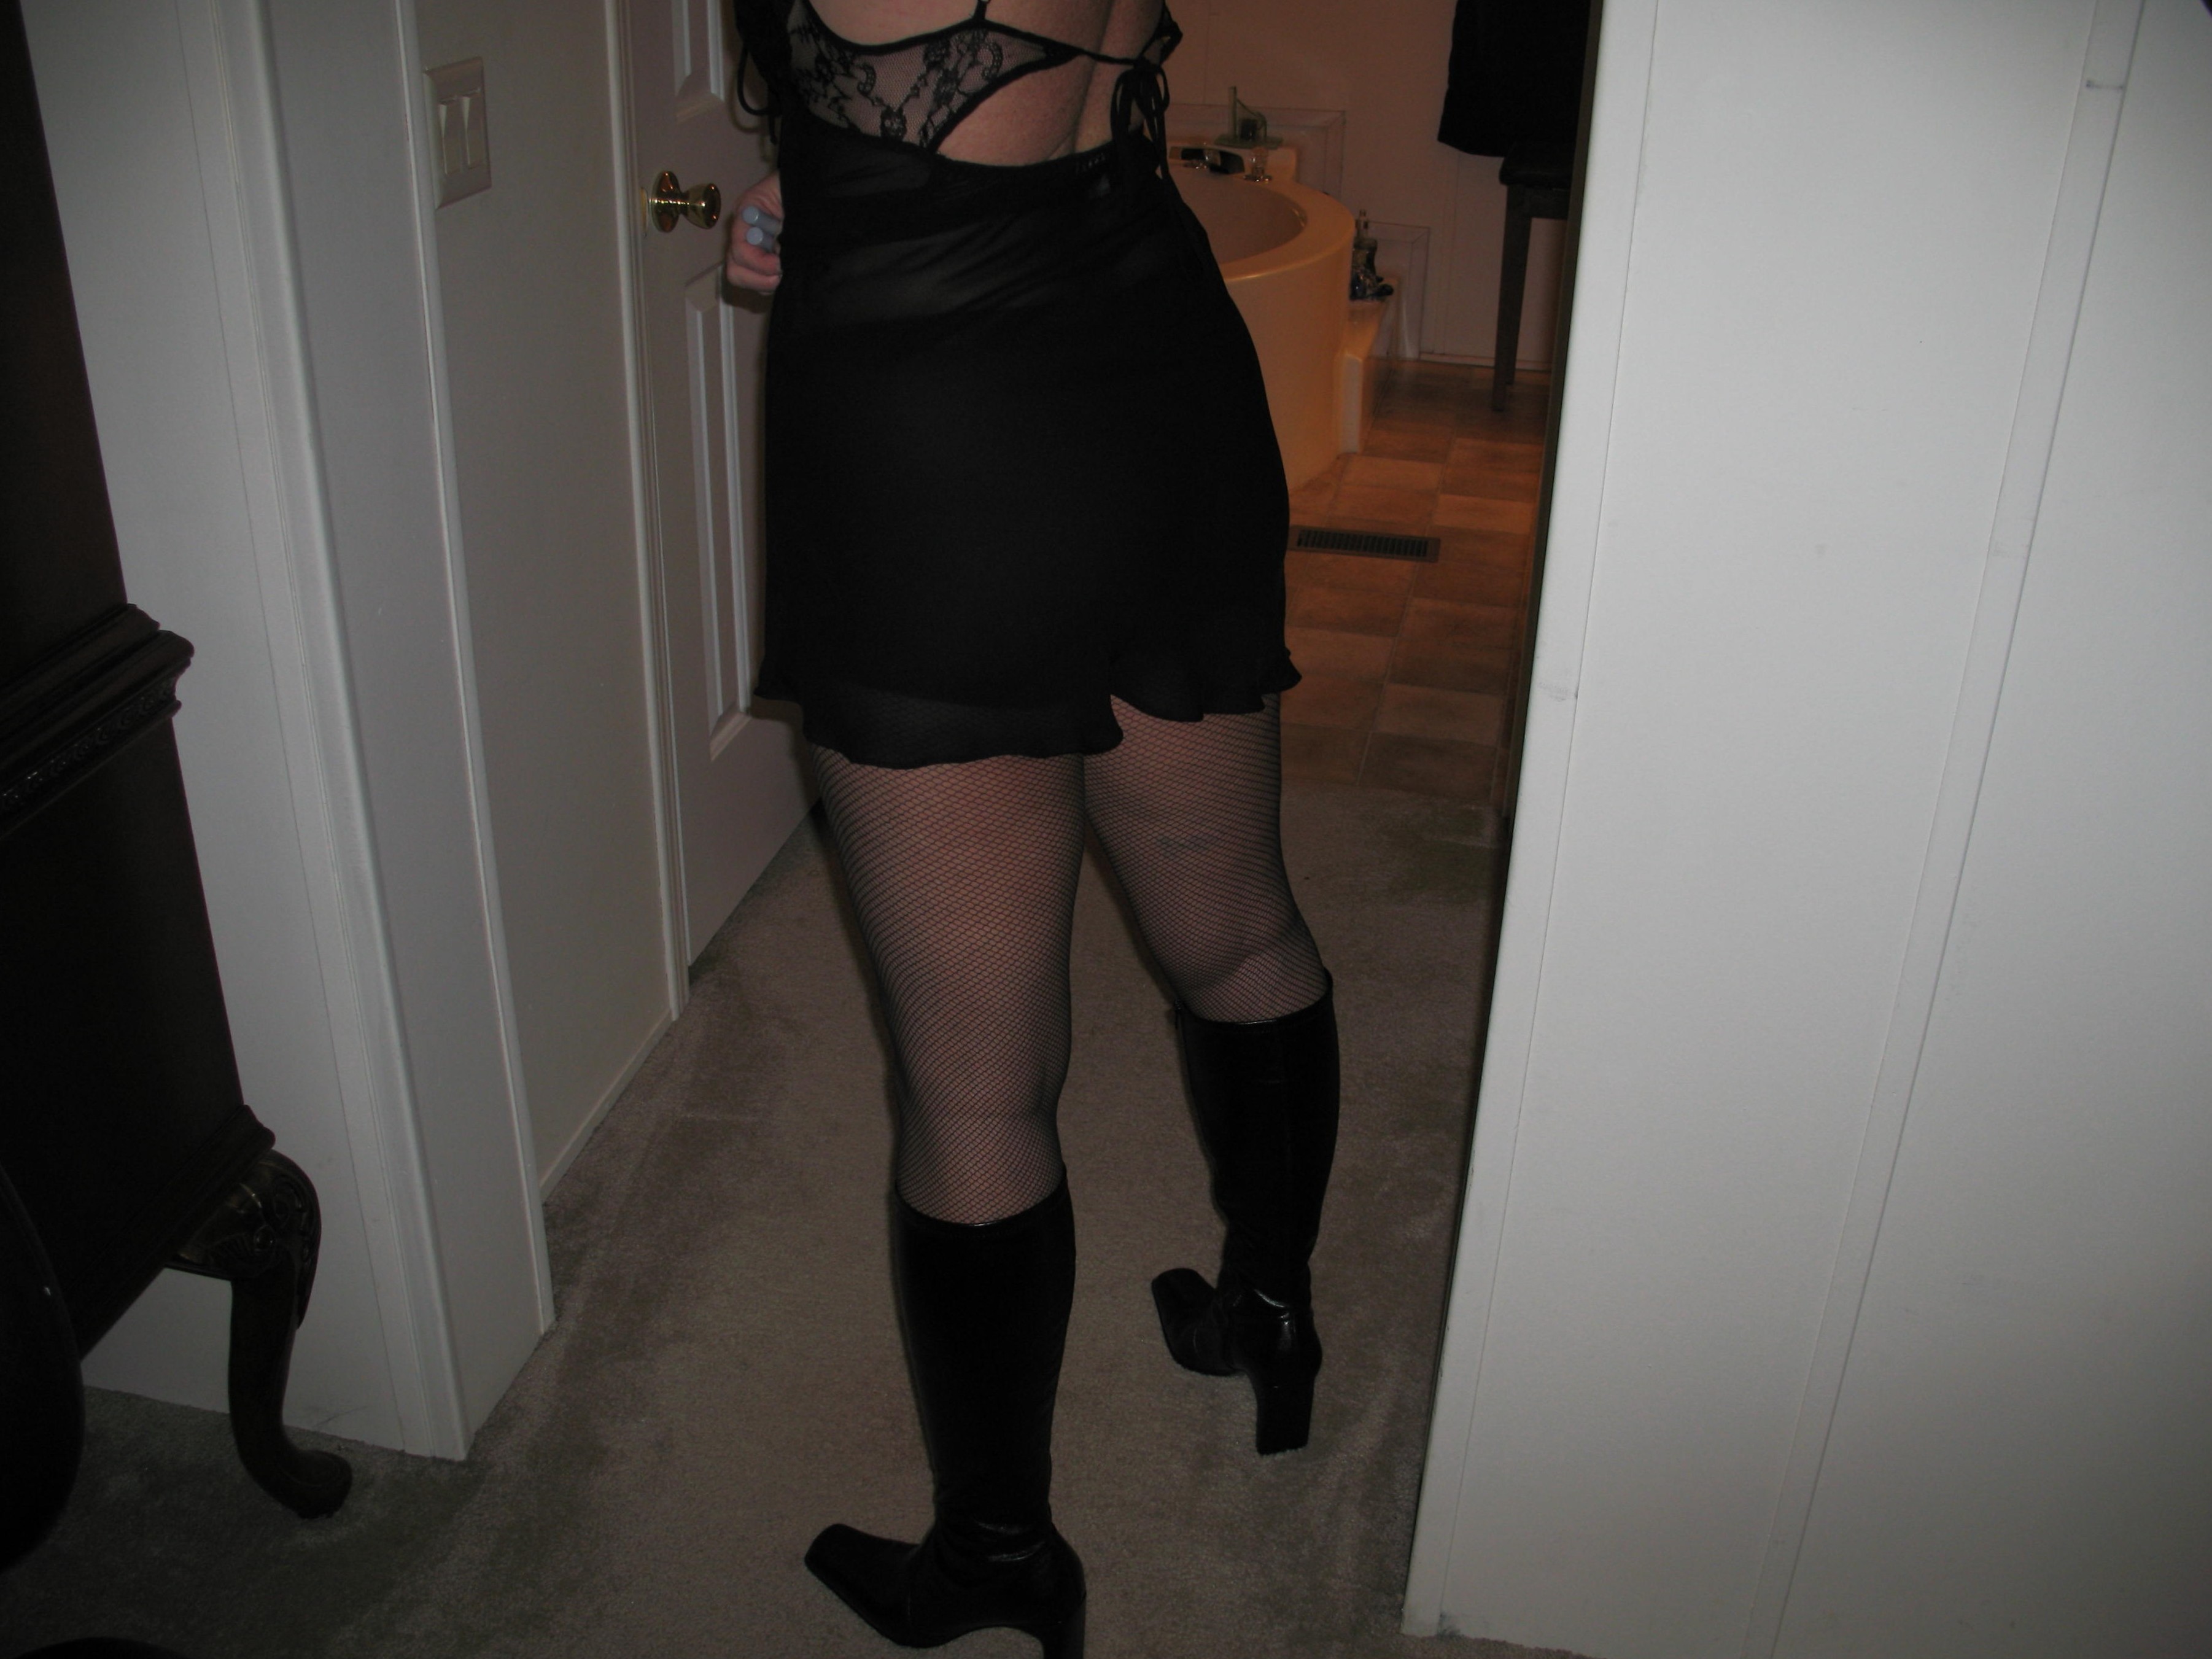 Me in one of my husbands favorite outfits